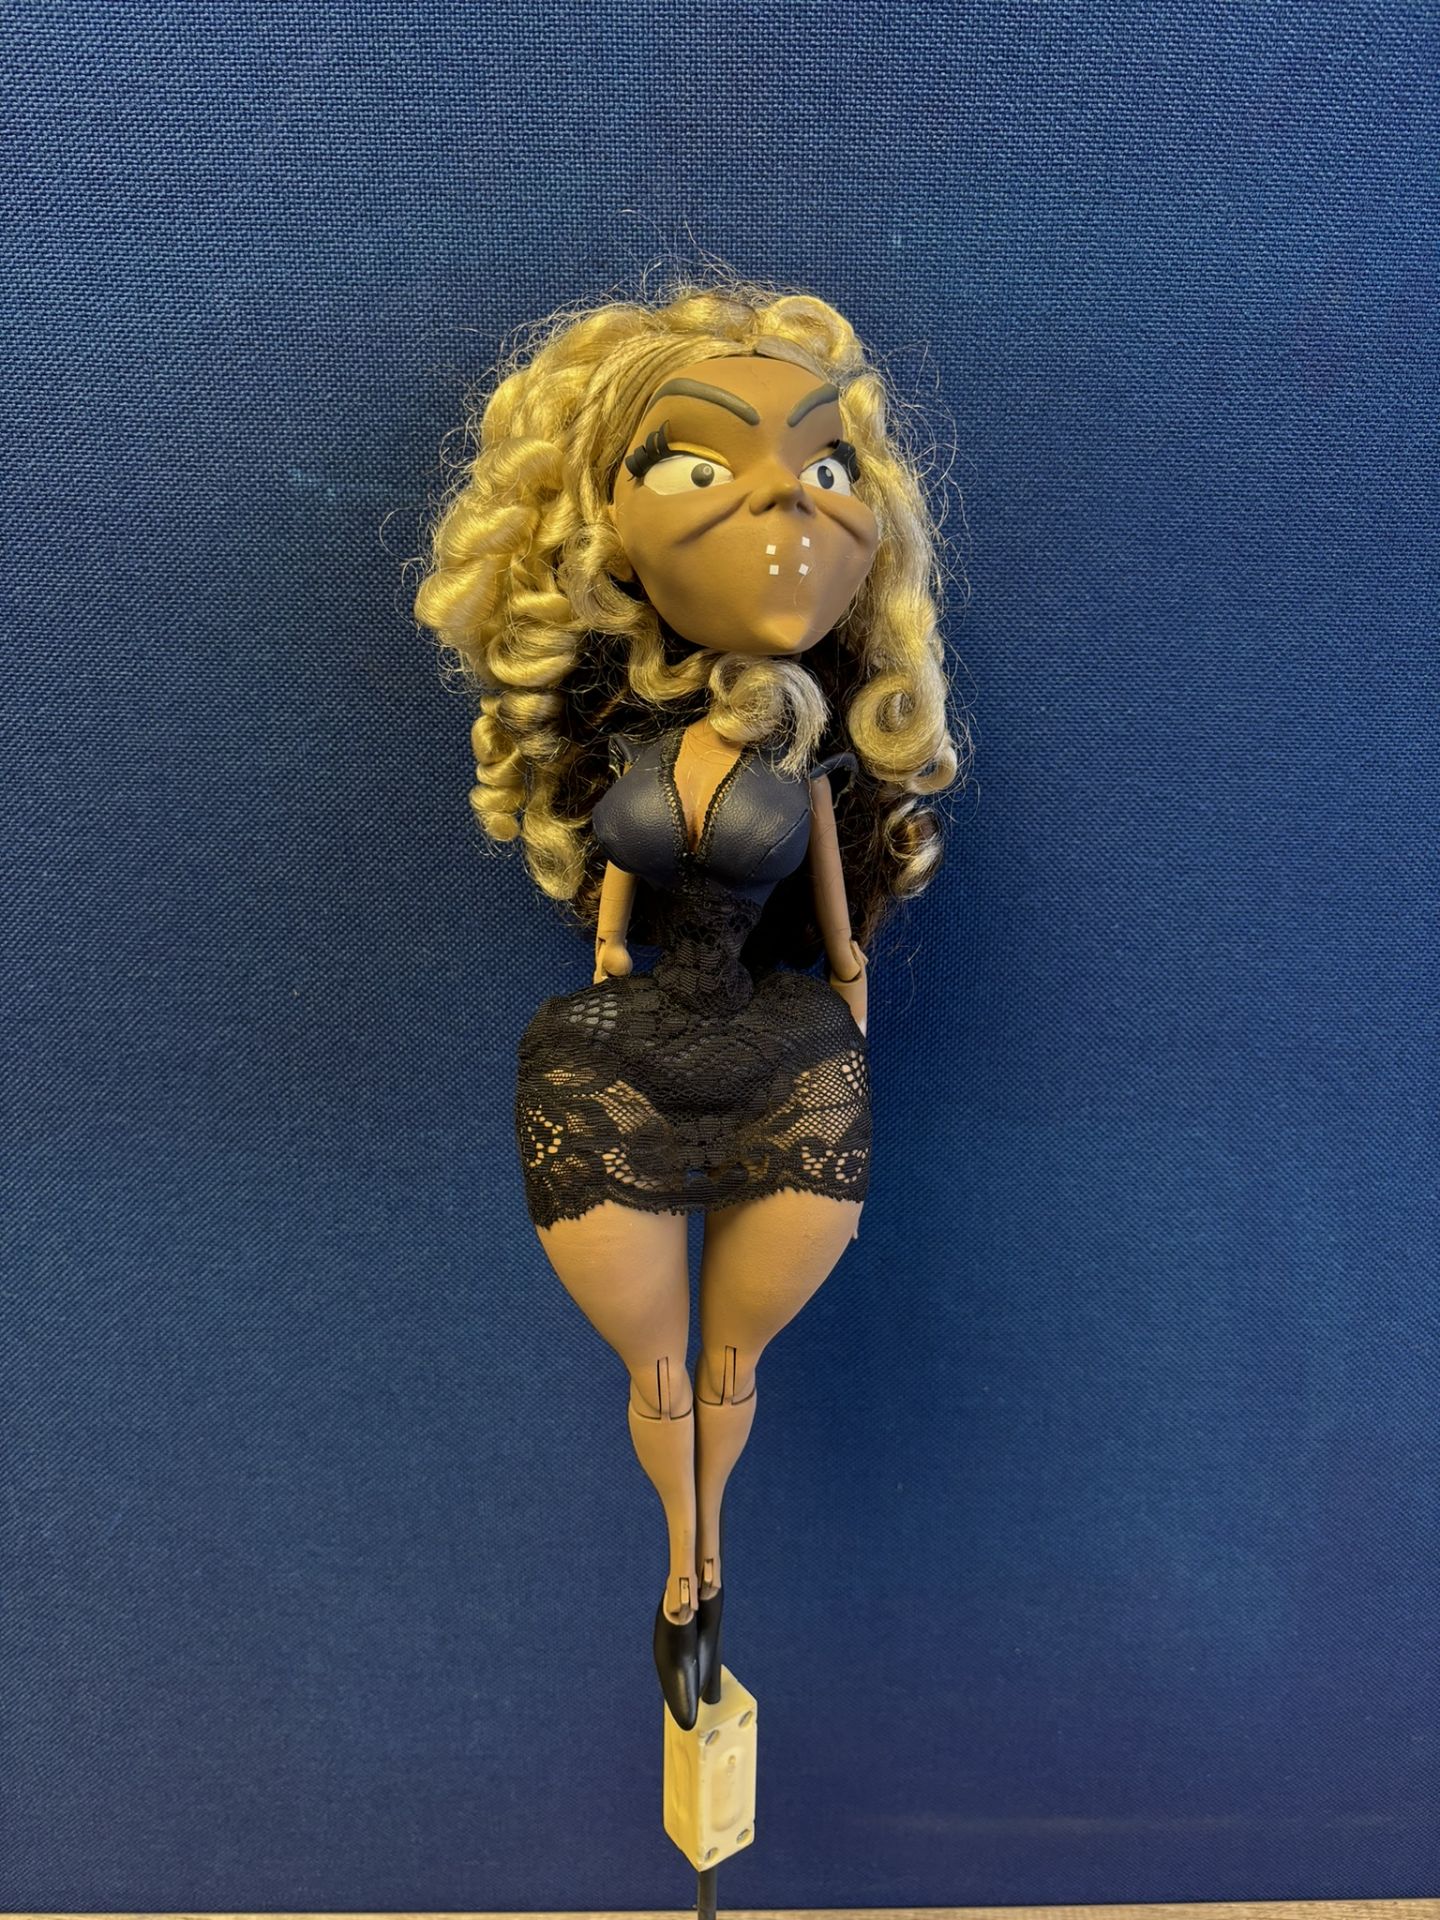 Newzoid puppet - Beyoncé Knowles - Image 2 of 3